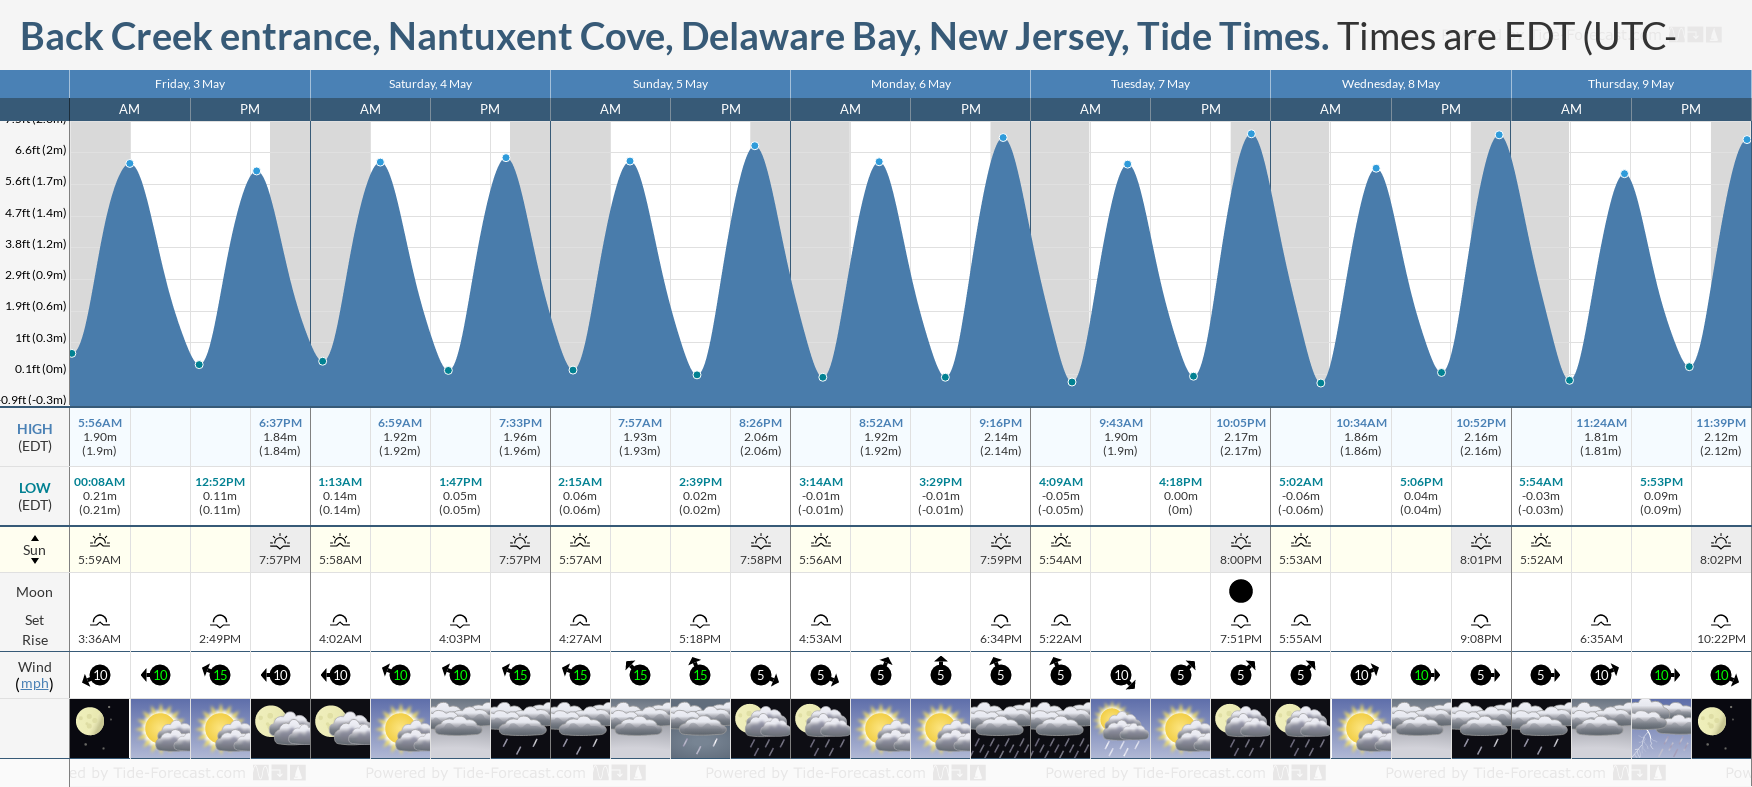 Back Creek entrance, Nantuxent Cove, Delaware Bay, New Jersey Tide Chart including high and low tide tide times for the next 7 days